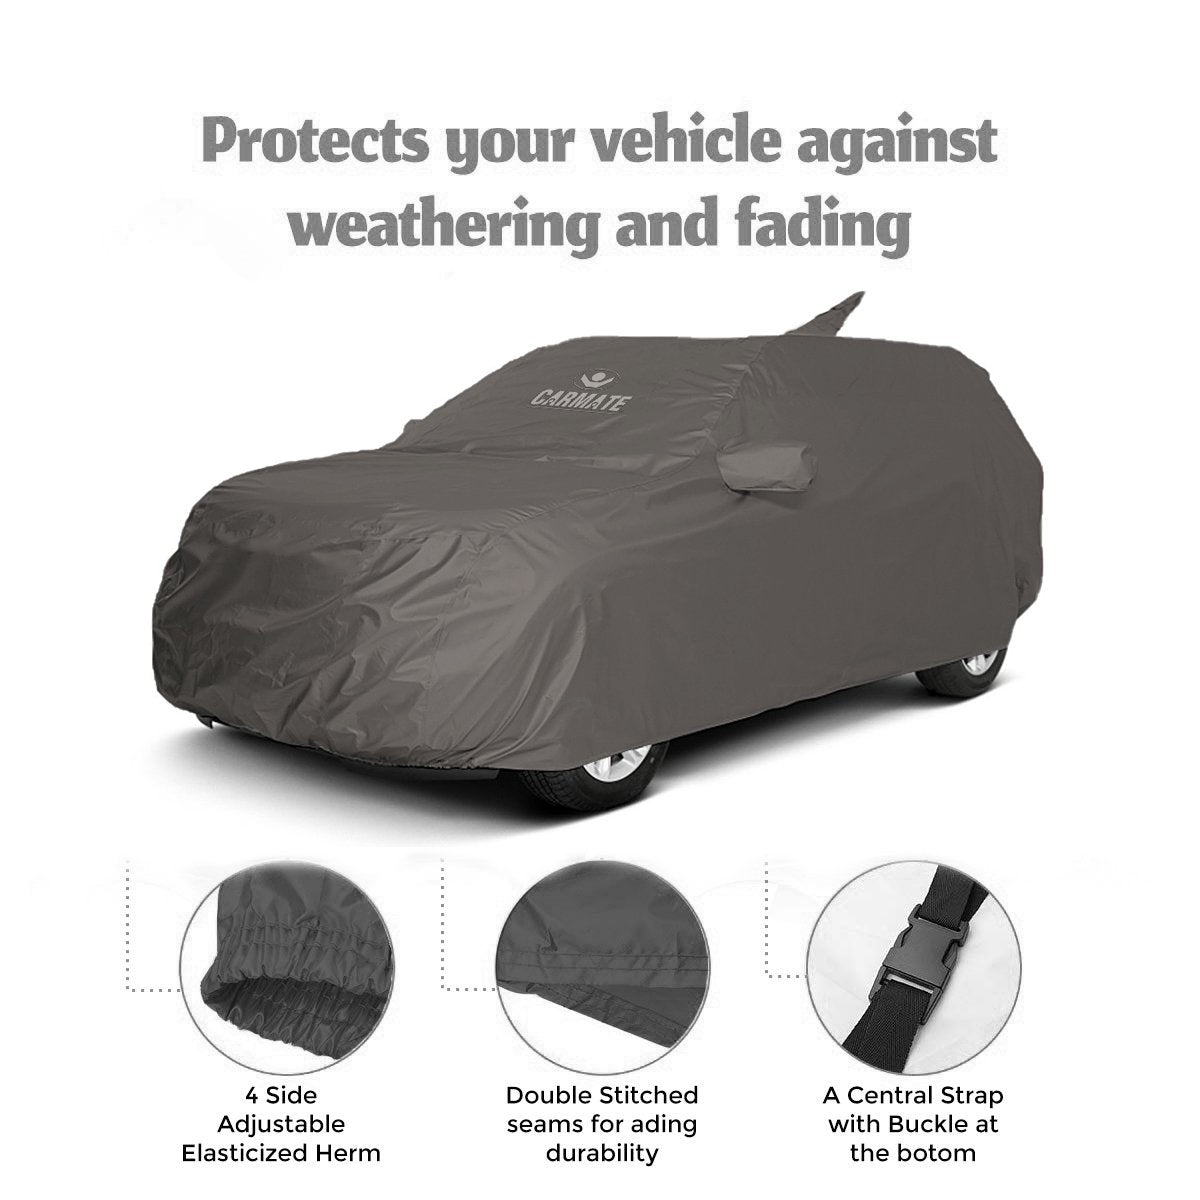 Carmate Car Body Cover 100% Waterproof Pride (Grey) for SsangYong - Rexton - CARMATE®